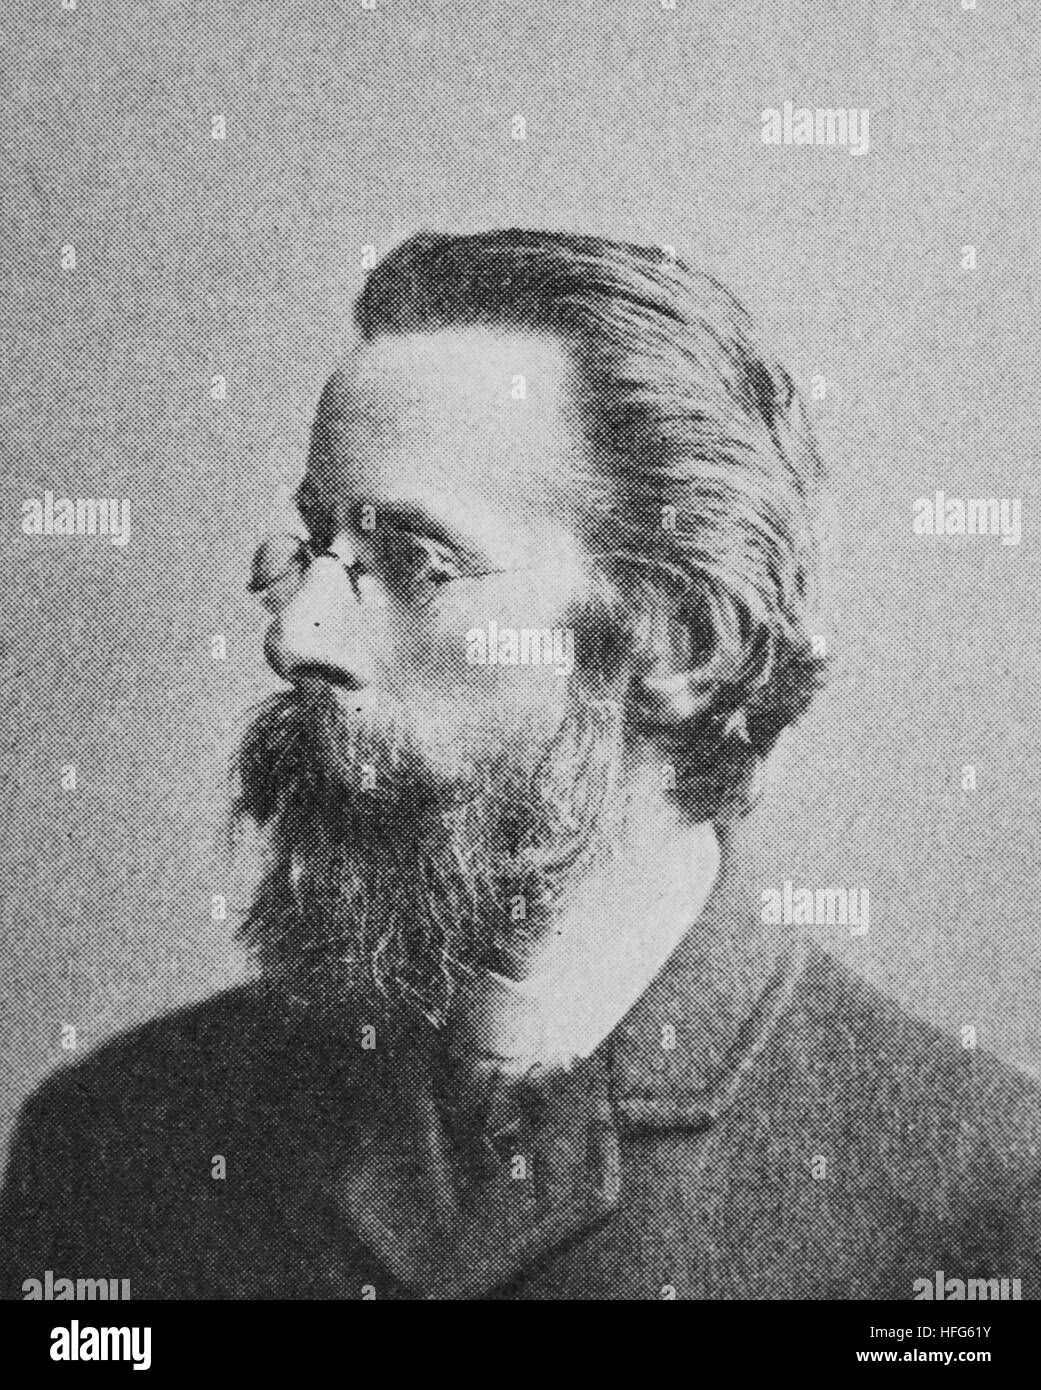 Heinrich Picot de Peccaduc, Freiherr von Herzogenberg, 1843 - 1900, was an Austrian composer and conductor descended from a French aristocratic family, reproduction photo from the year 1895, digital improved Stock Photo